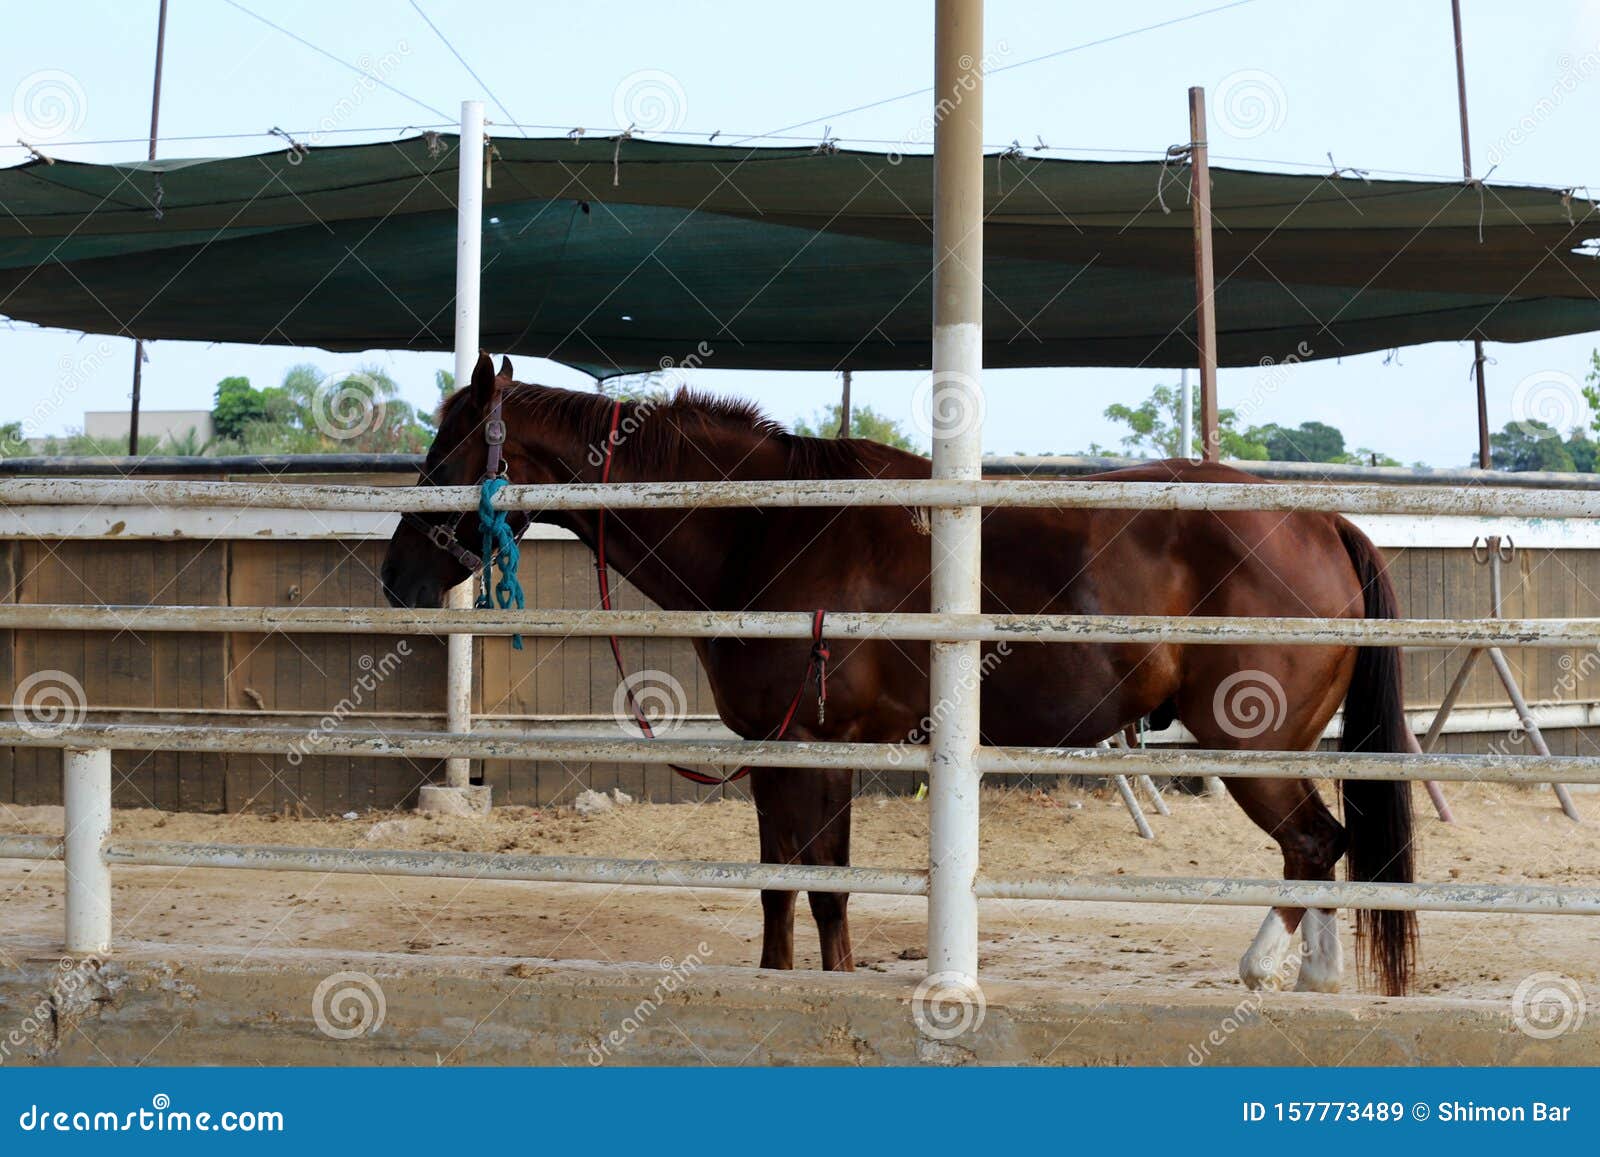 The Horse is a Large Domestic One-hoofed Animal. Stock Image - Image of  israel, cart: 157773489